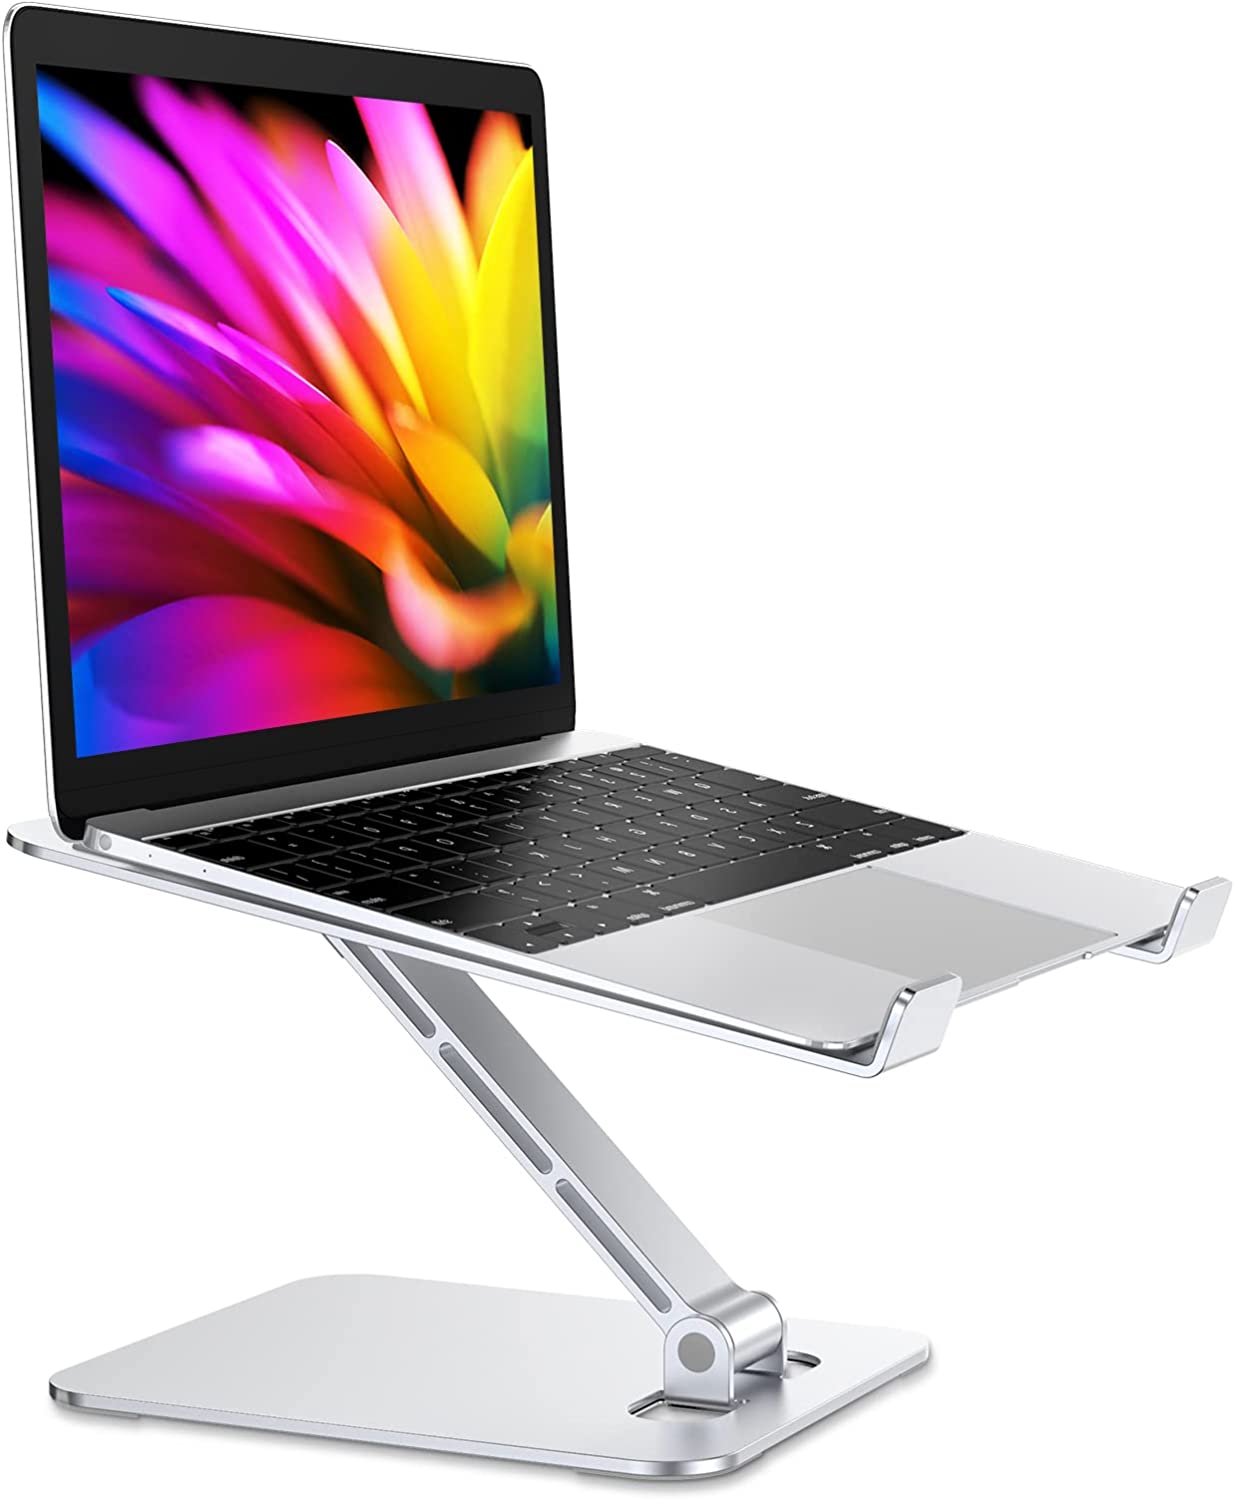 RIWUCT Foldable Laptop Stand, Height Adjustable Ergonomic Computer Stand for Desk, Ventilated Aluminum Portable Laptop Riser Holder Mount Compatible with MacBook Pro Air, All Notebooks 10-16"